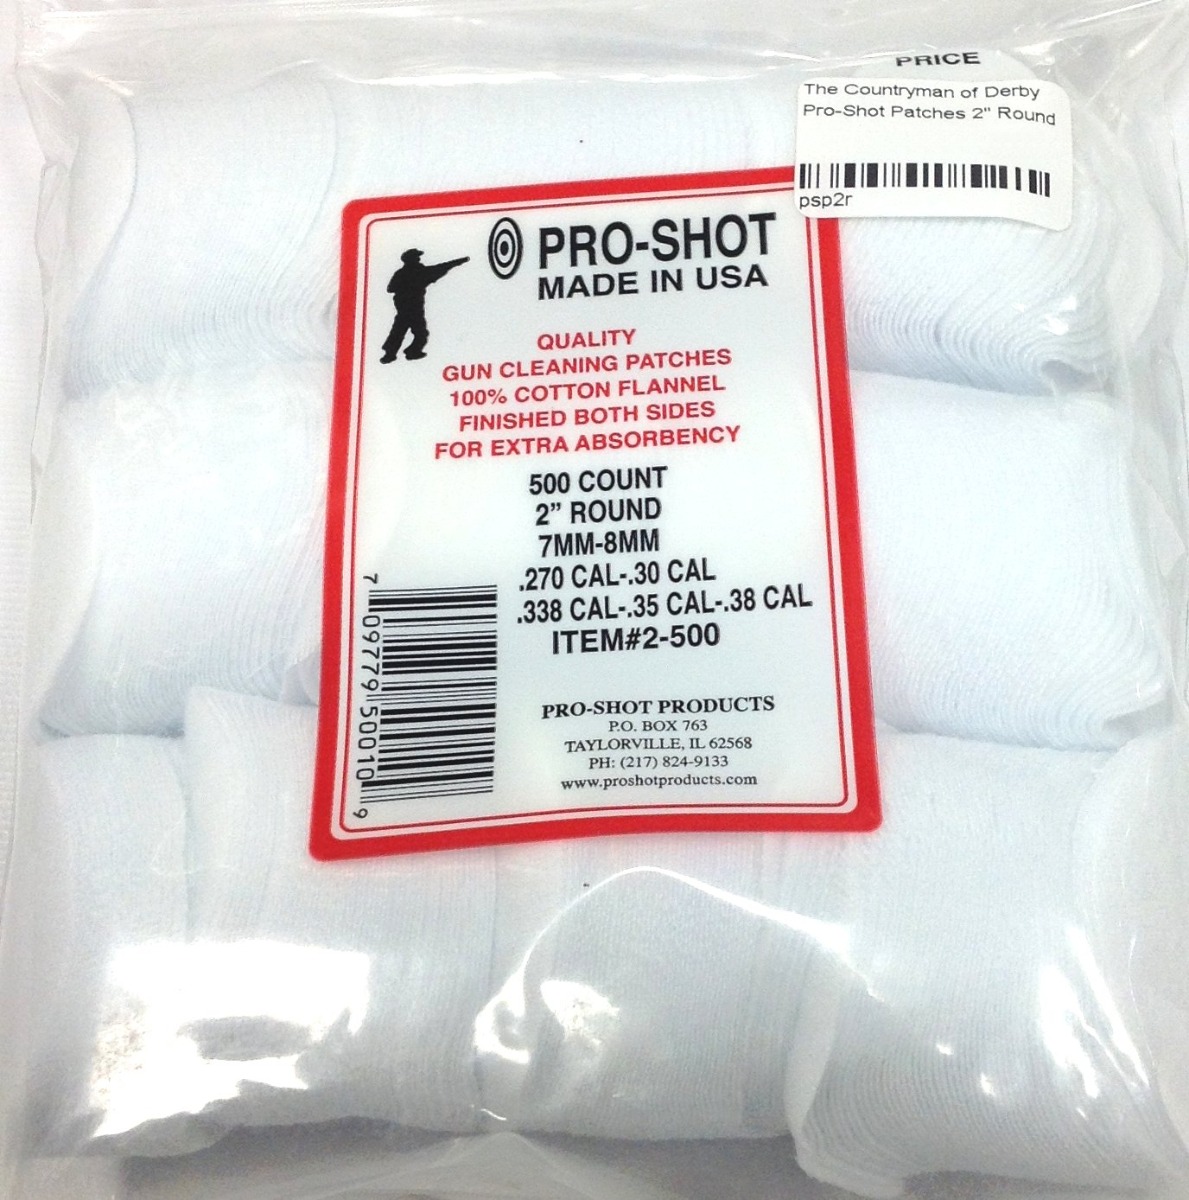 Pro-Shot 2" Round Rifle Cleaning Patches